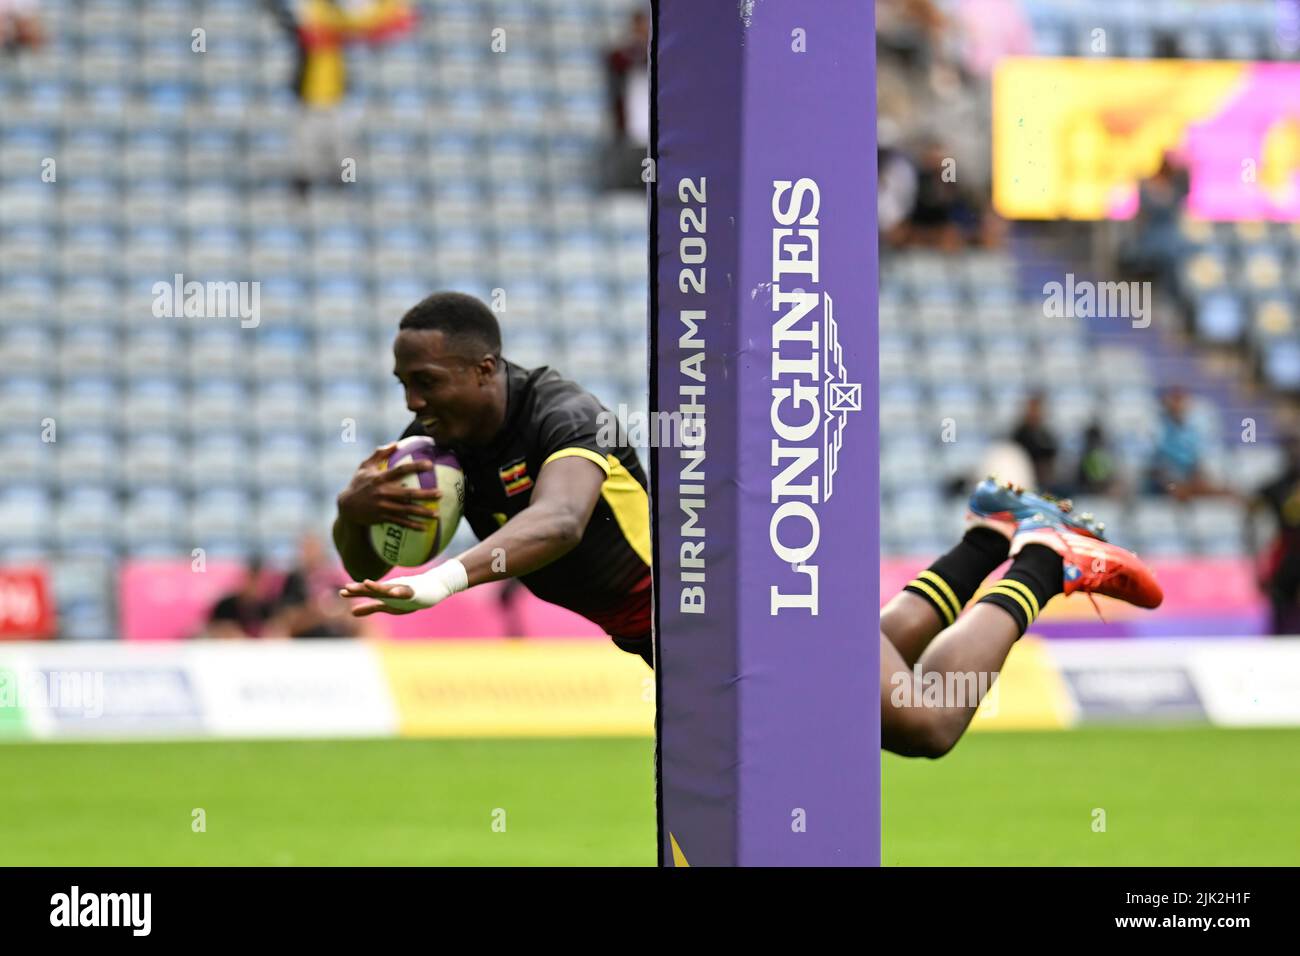 Desire Ayera of Uganda scores a try to take the lead against Australia during the Rugby Sevens at the Commonwealth Games at Coventry Stadium on Friday 29th July 2022